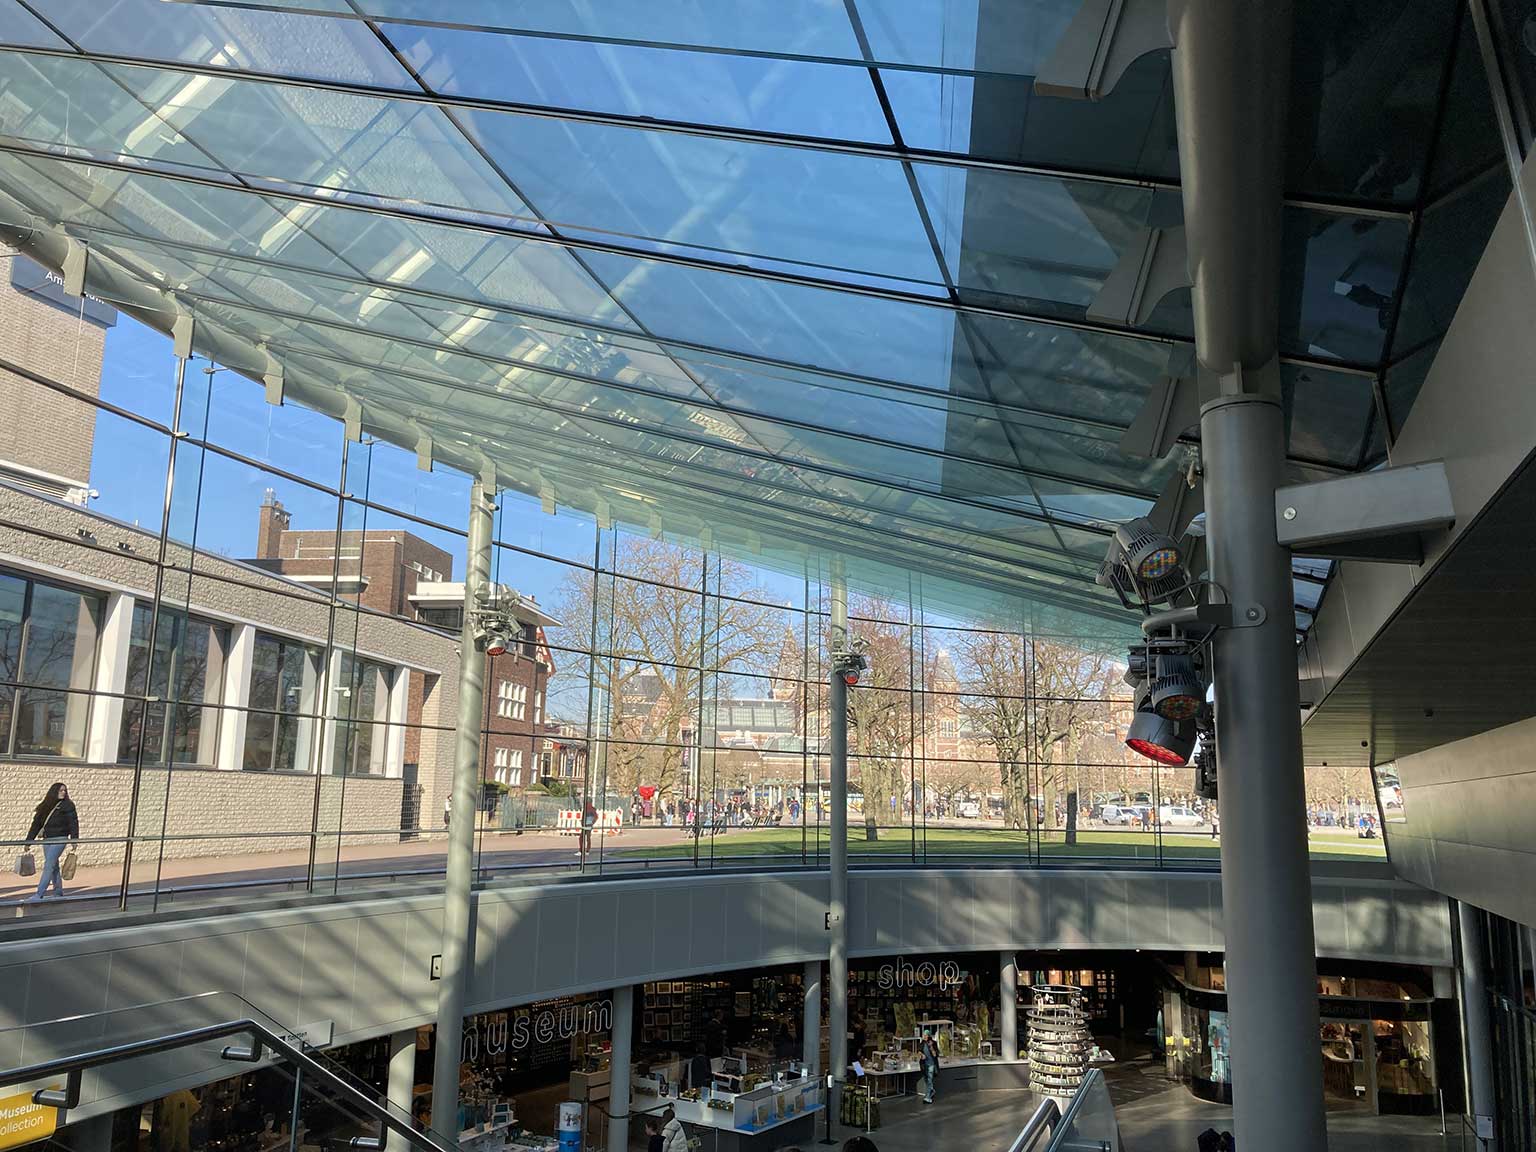 View from inside the new 1999 wing of the Van Gogh museum, Amsterdam,towards Museumplein